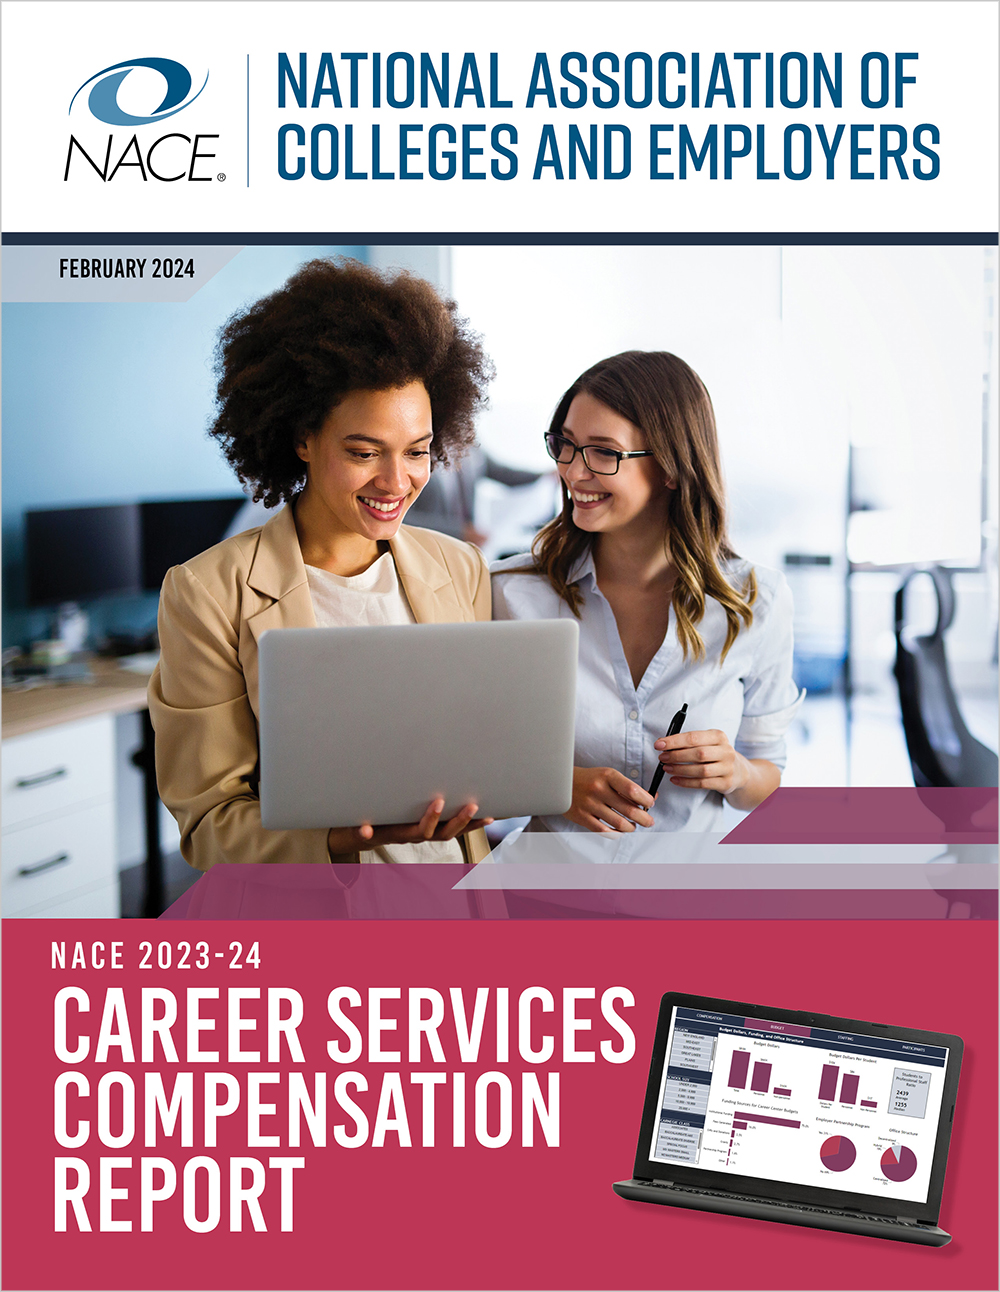 CAREER SERVICES COMPENSATION REPORT AND DASHBOARD